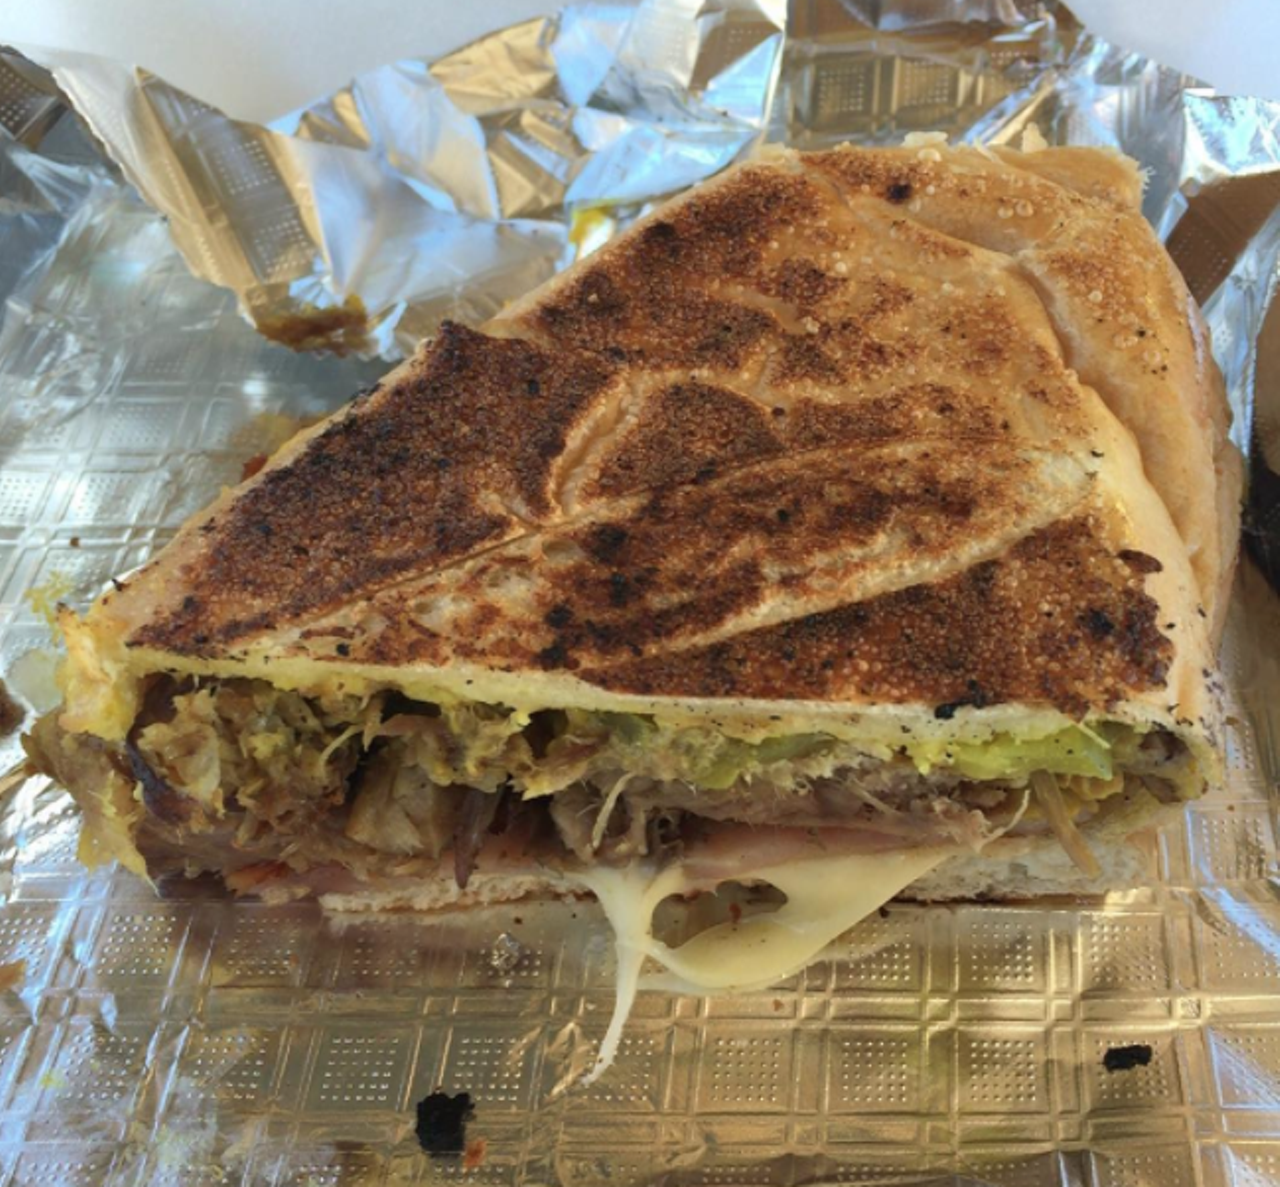 SA Fresh
1015 Rittiman Road, Suite 113, (210) 829-4446
Lauded by some customers as “the best they’ve ever had,” the Cubano Sandwich is filled with mojo-braised pork, ham, Swiss cheese, adobo verde mayo, house-made pickled red onions and pickles, all on a toasted French roll.
Photo via Instagram, safresh